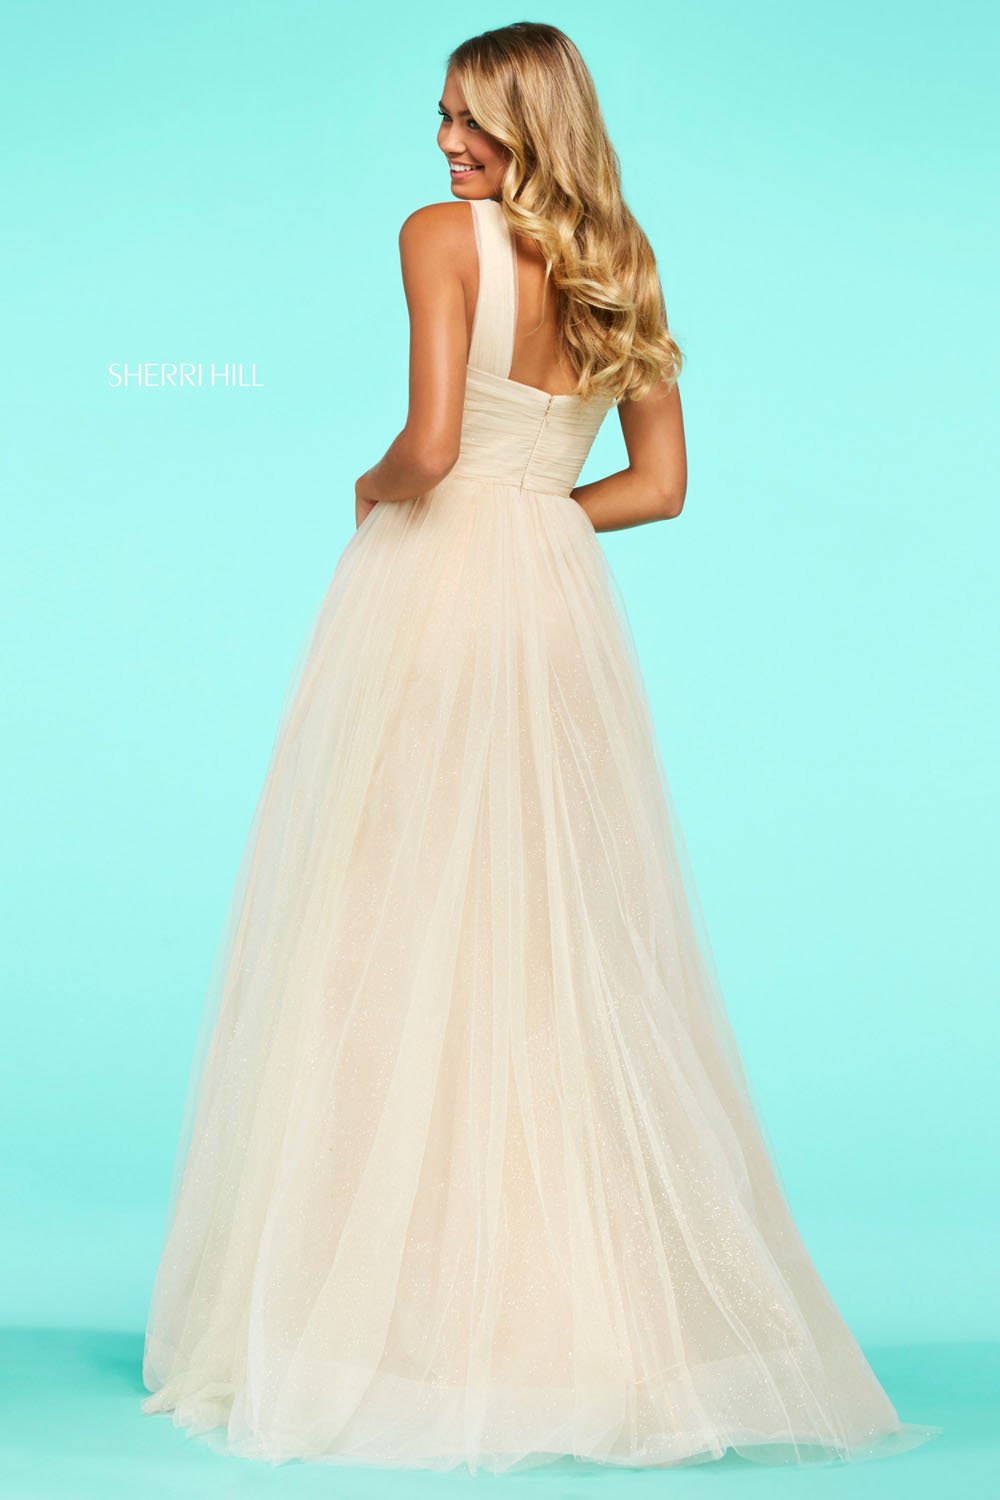 Sherri Hill 53590 dress images in these colors: Champagne.